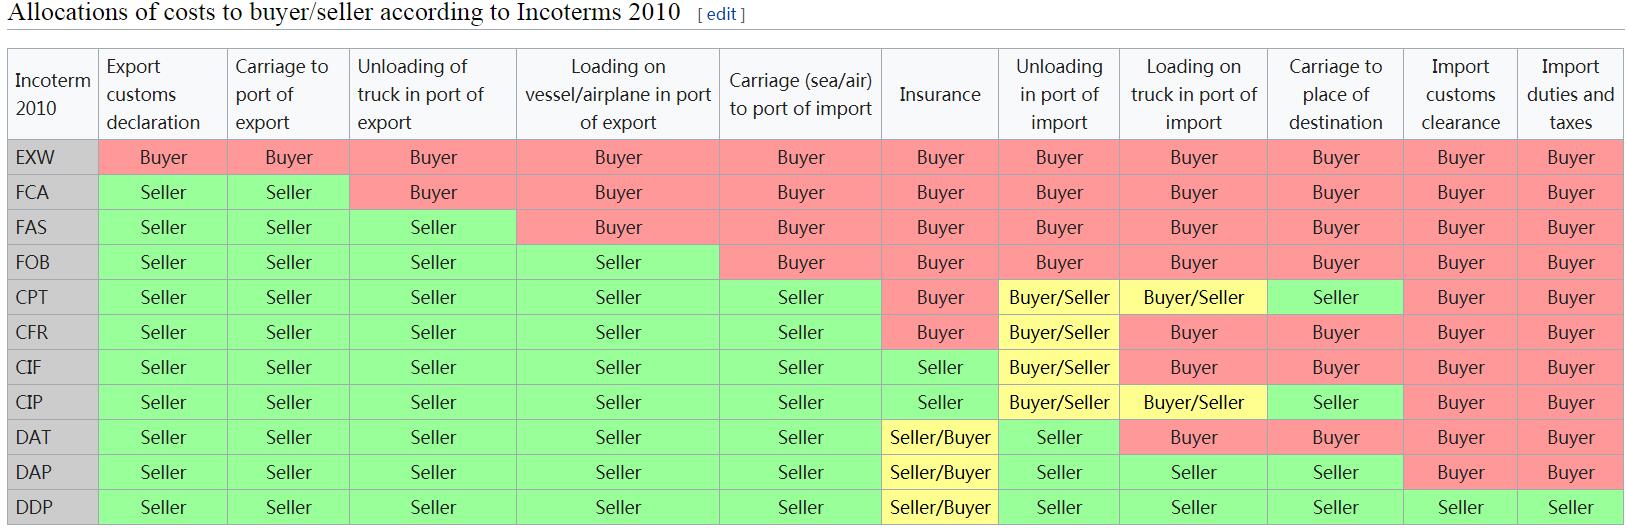 Q&A: Allocations of costs to buyer/seller according to Incoterms 2010